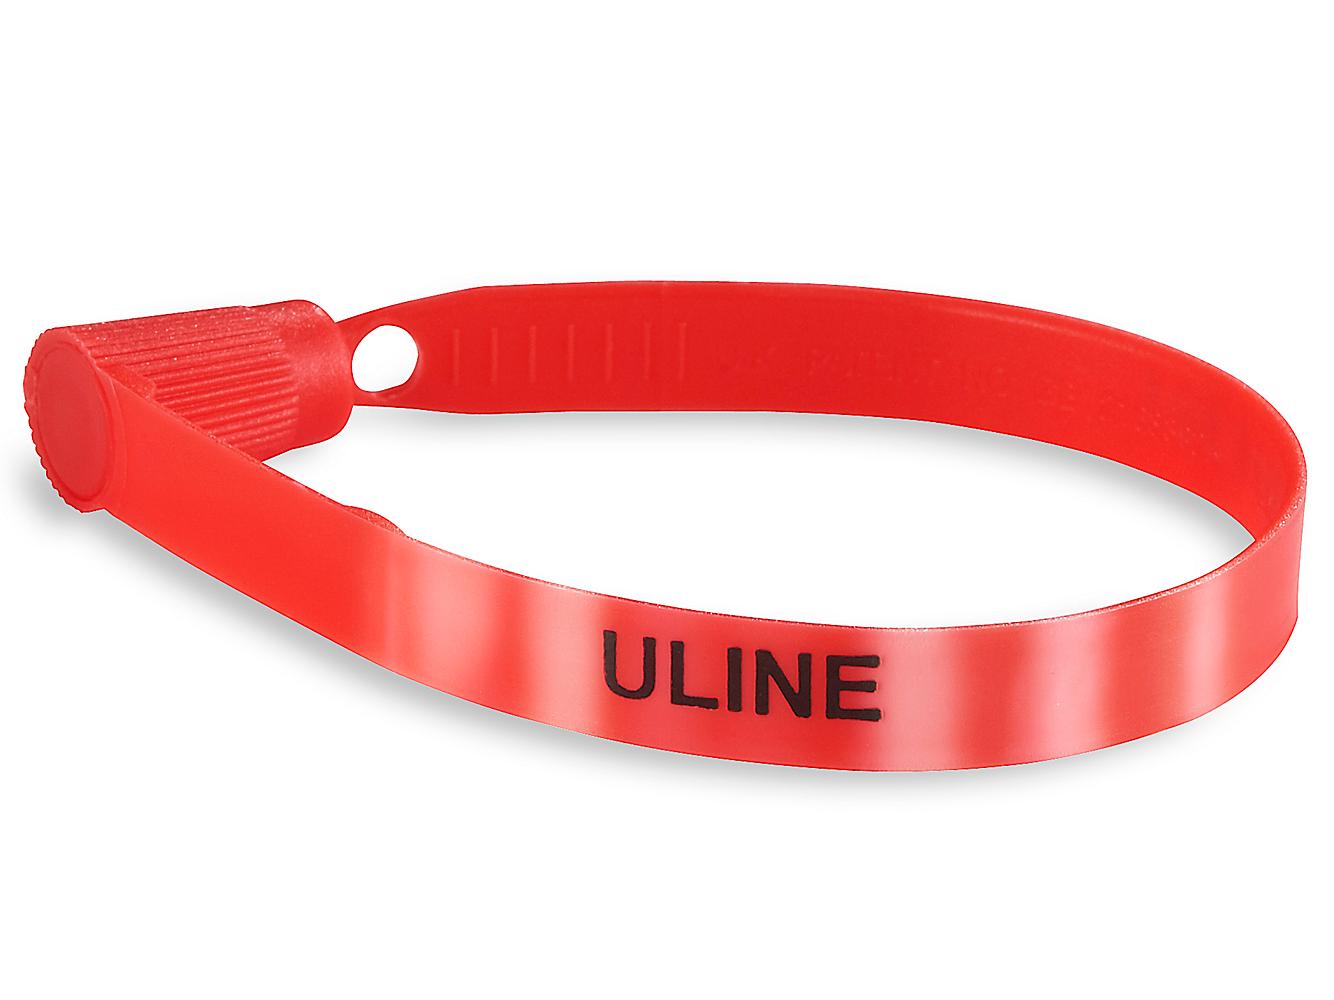 Uline S-13677R RED Plastic Truck Seals 100 COUNT Free Shipping 